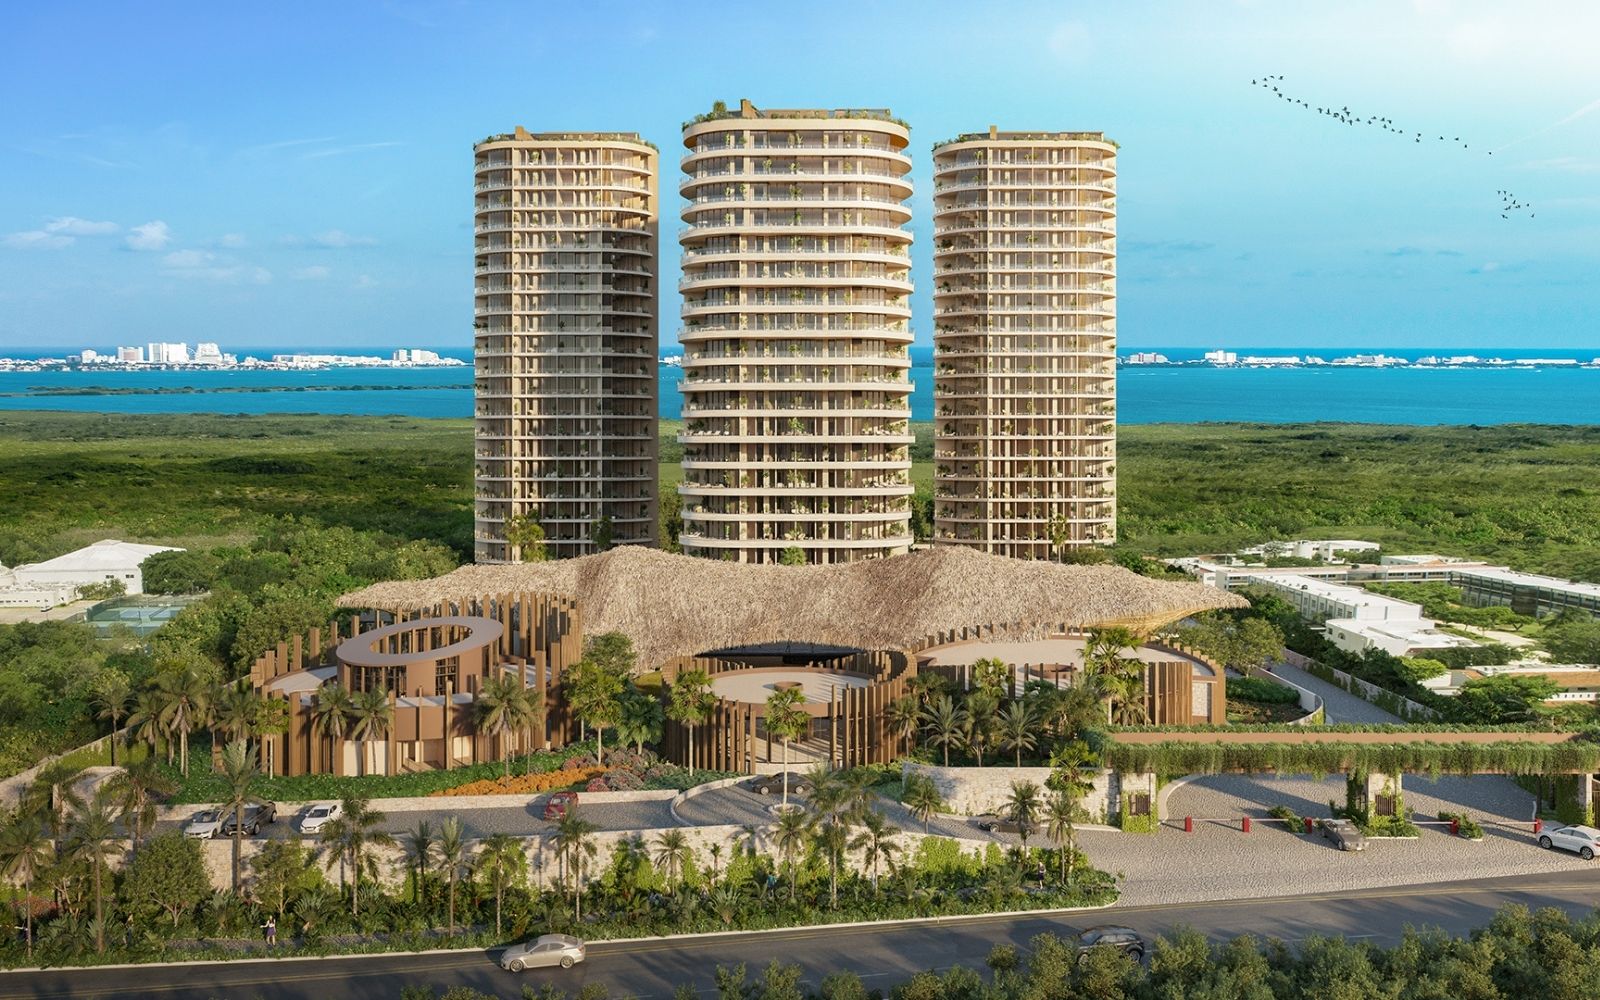 Condominium with private garden, infinity pool, jacuzzi, snack bar, service room, pre-construction, in Puerto Cancun